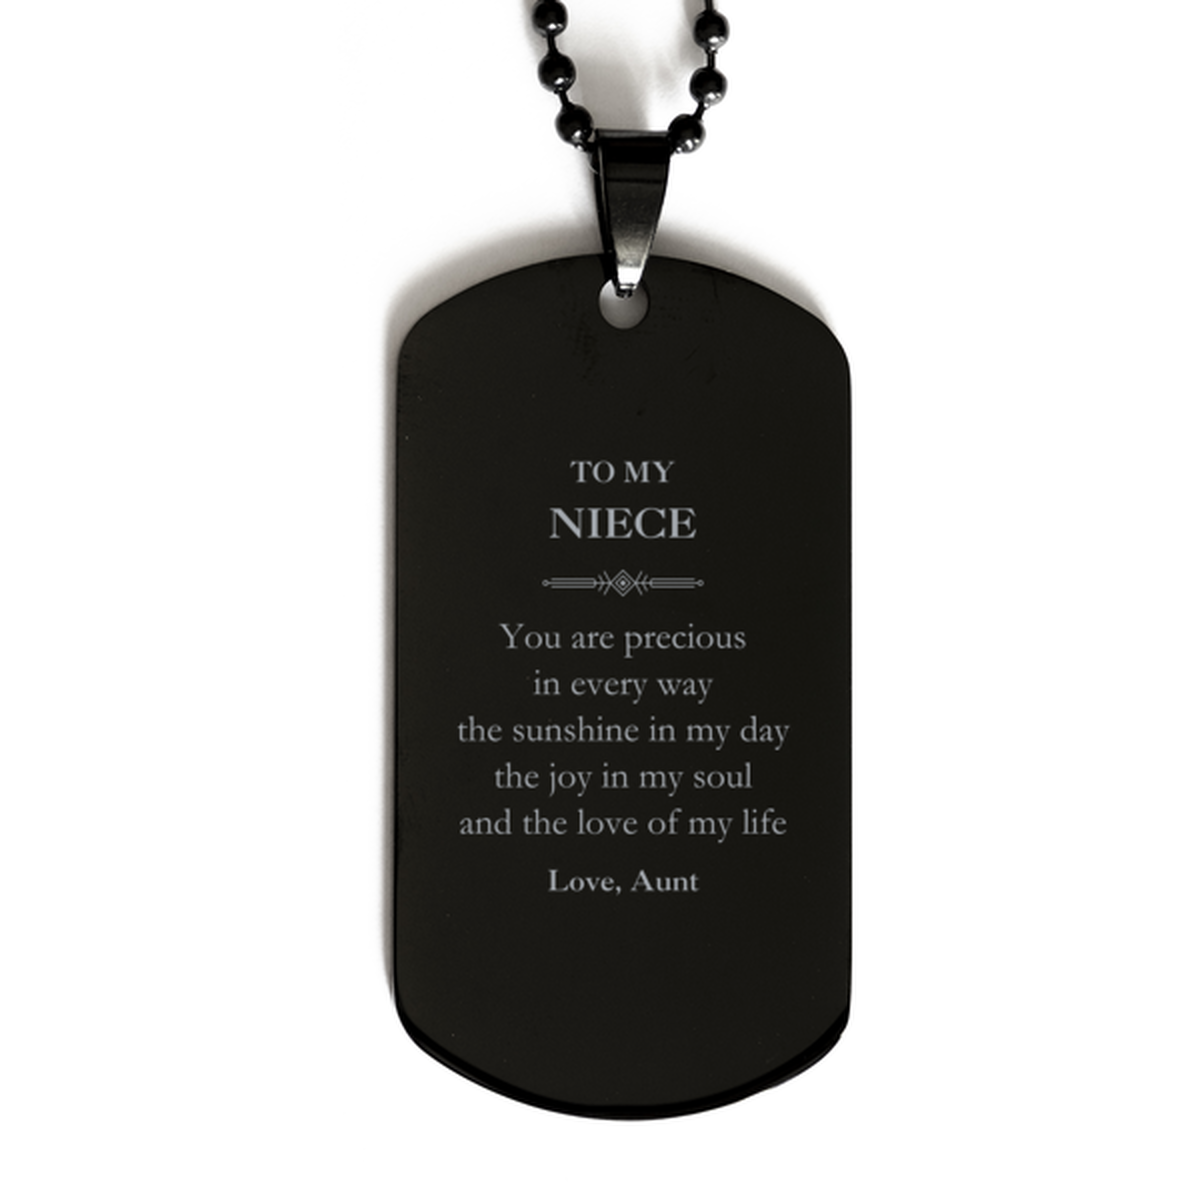 Graduation Gifts for Niece Black Dog Tag Present from Aunt, Christmas Niece Birthday Gifts Niece You are precious in every way the sunshine in my day. Love, Aunt